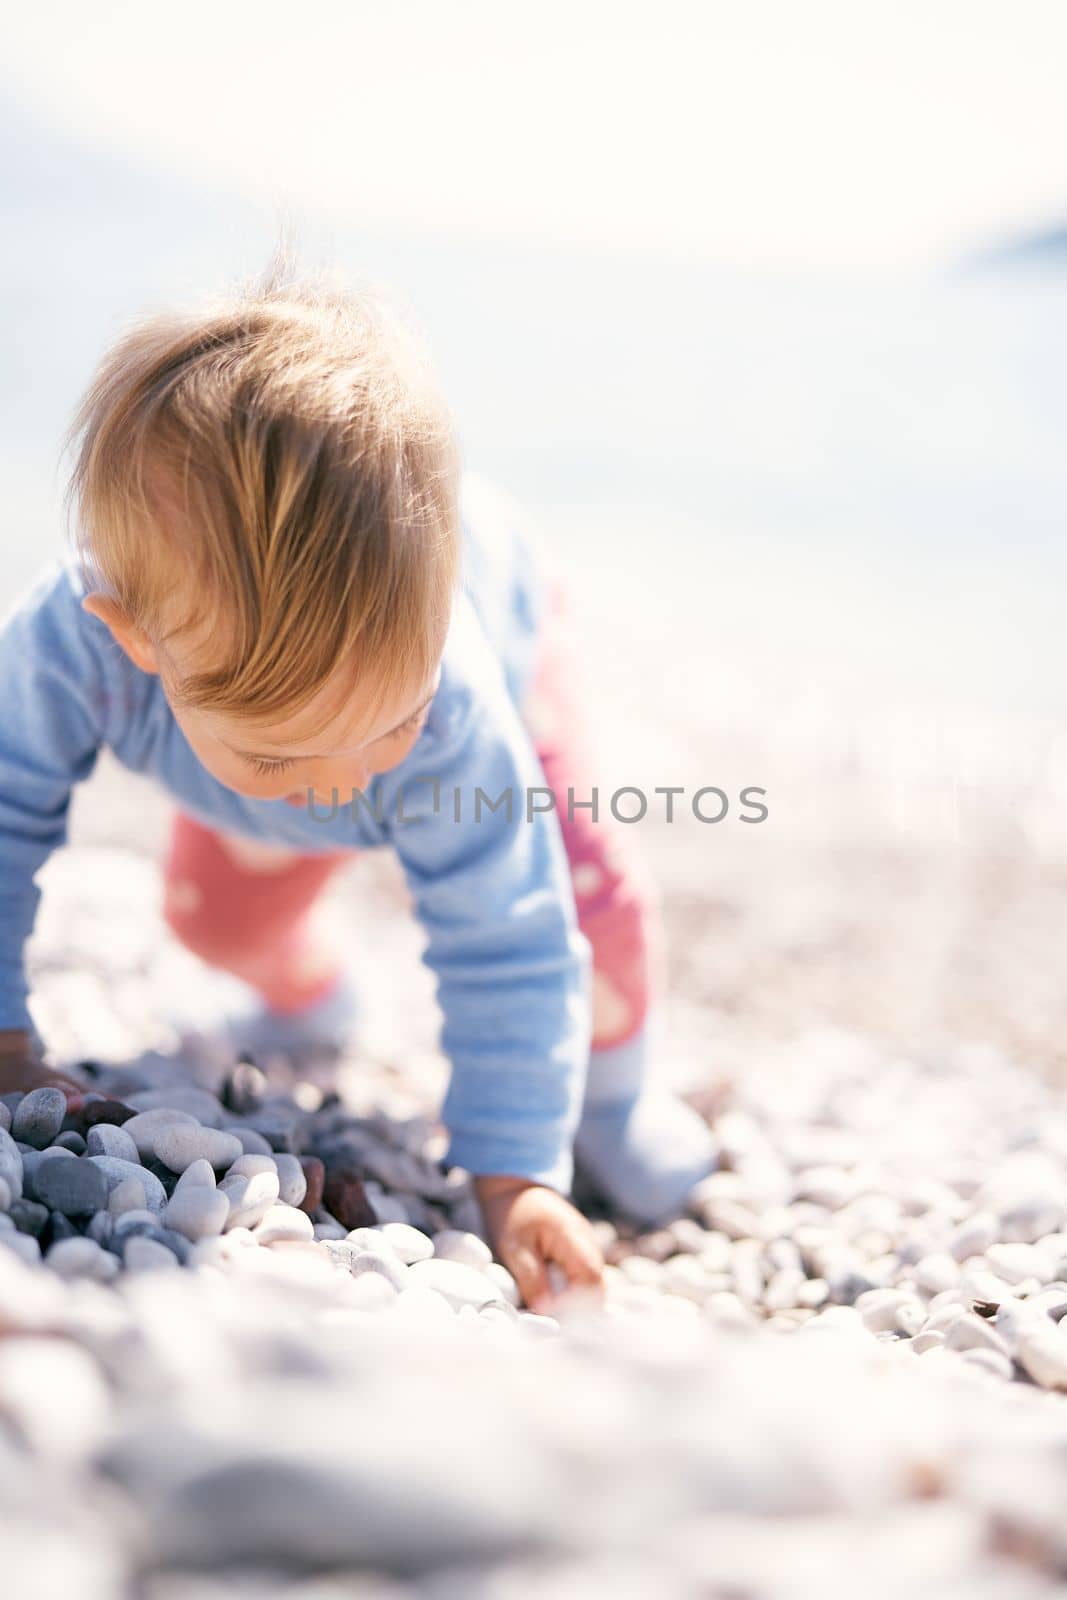 Cute baby is on all fours on a pebble beach with his head down. Close-up. High quality photo